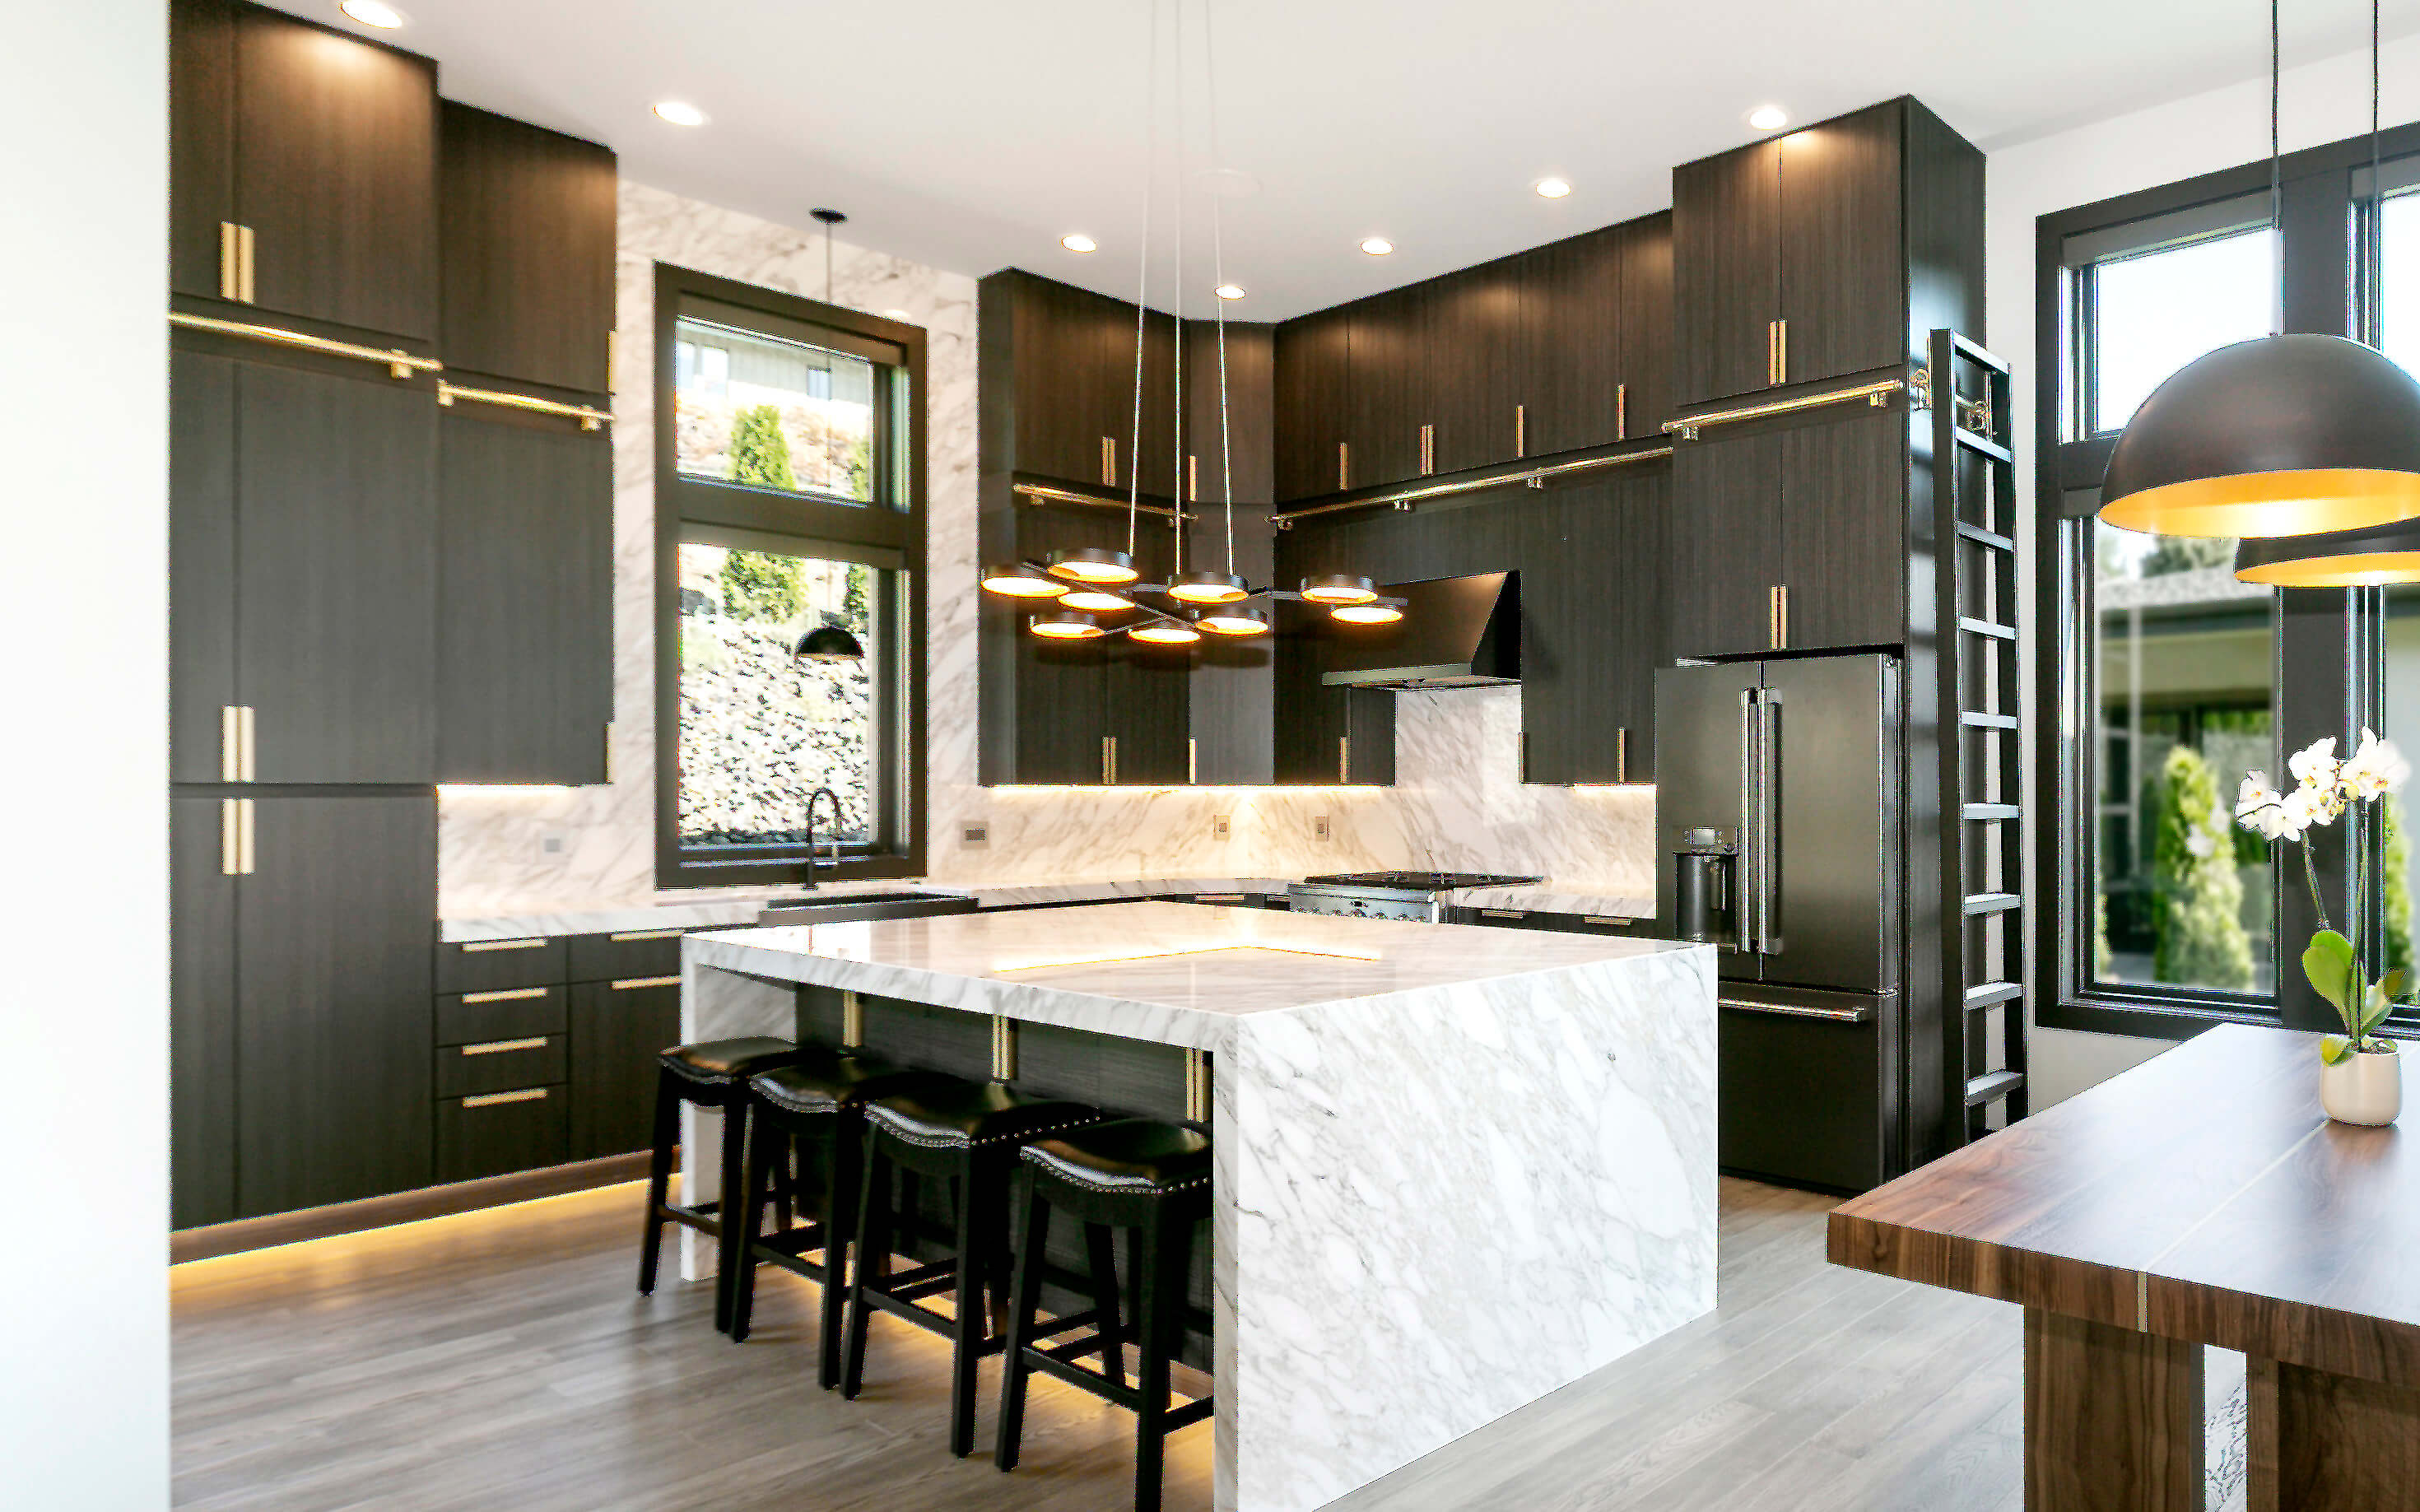 An ultra modern kitchen with contemporary black textured cabinets from Dura Supreme with futuristic lighting details and a wide waterfall kitchen island.